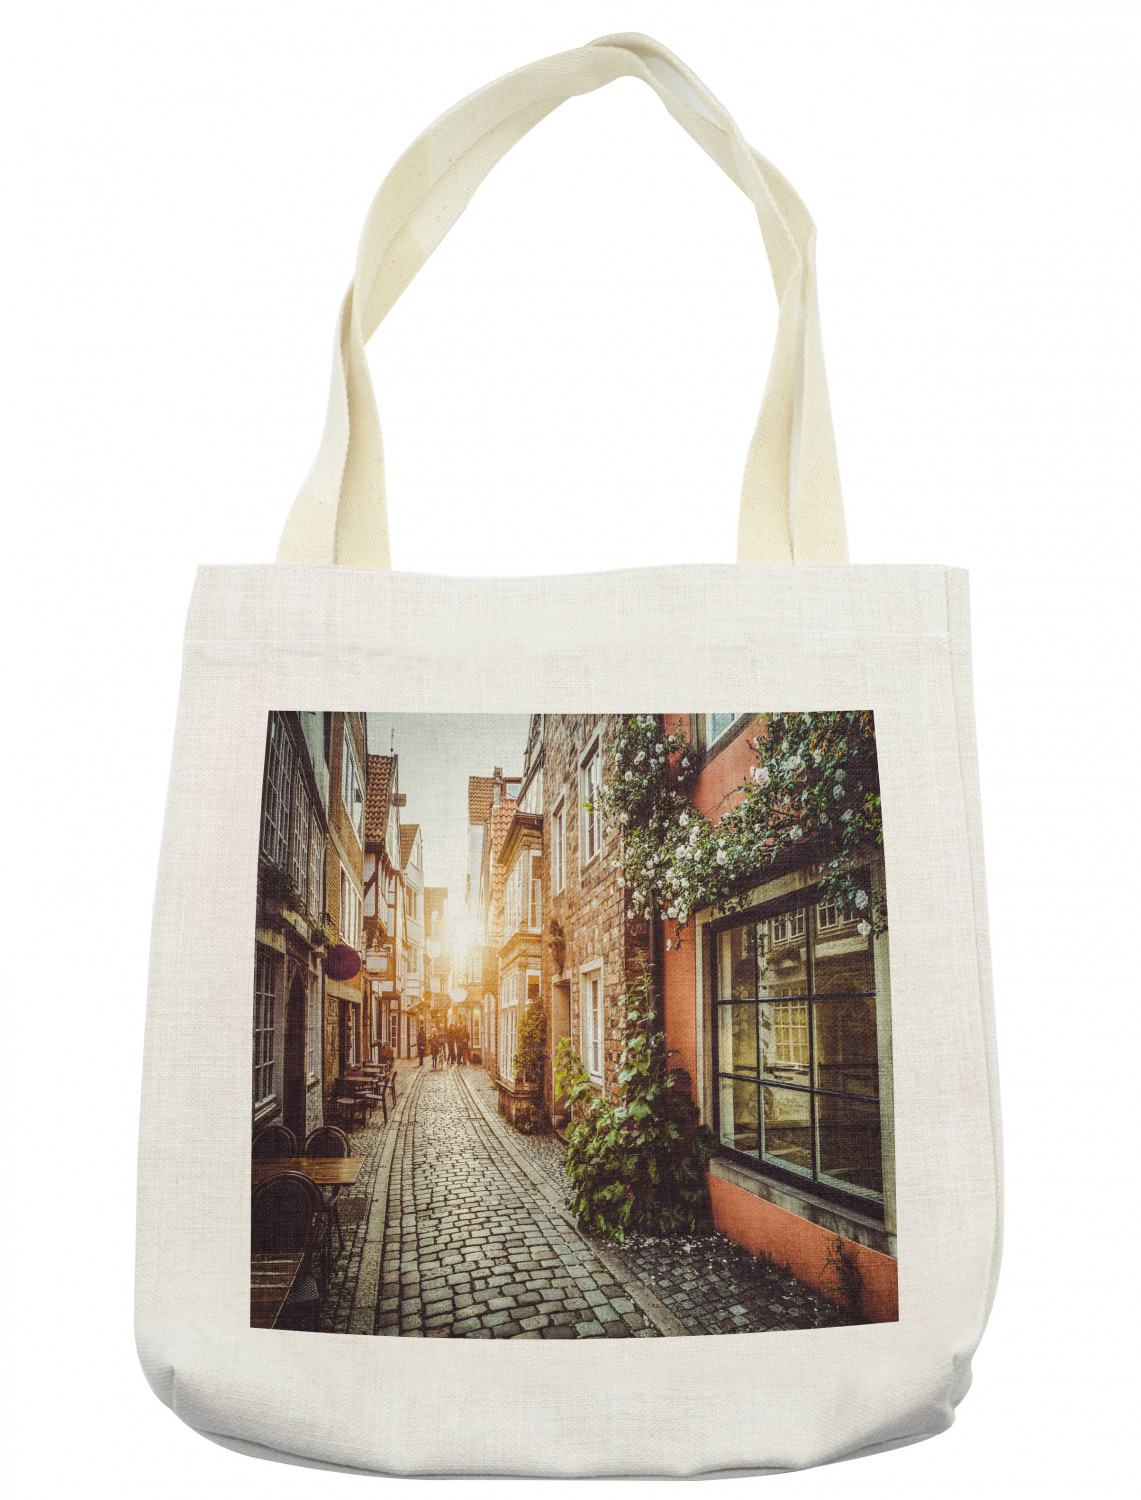 Details about   Ambesonne Adventure Theme Tote Bag Reusable Linen Sack Shopping Books Beach 